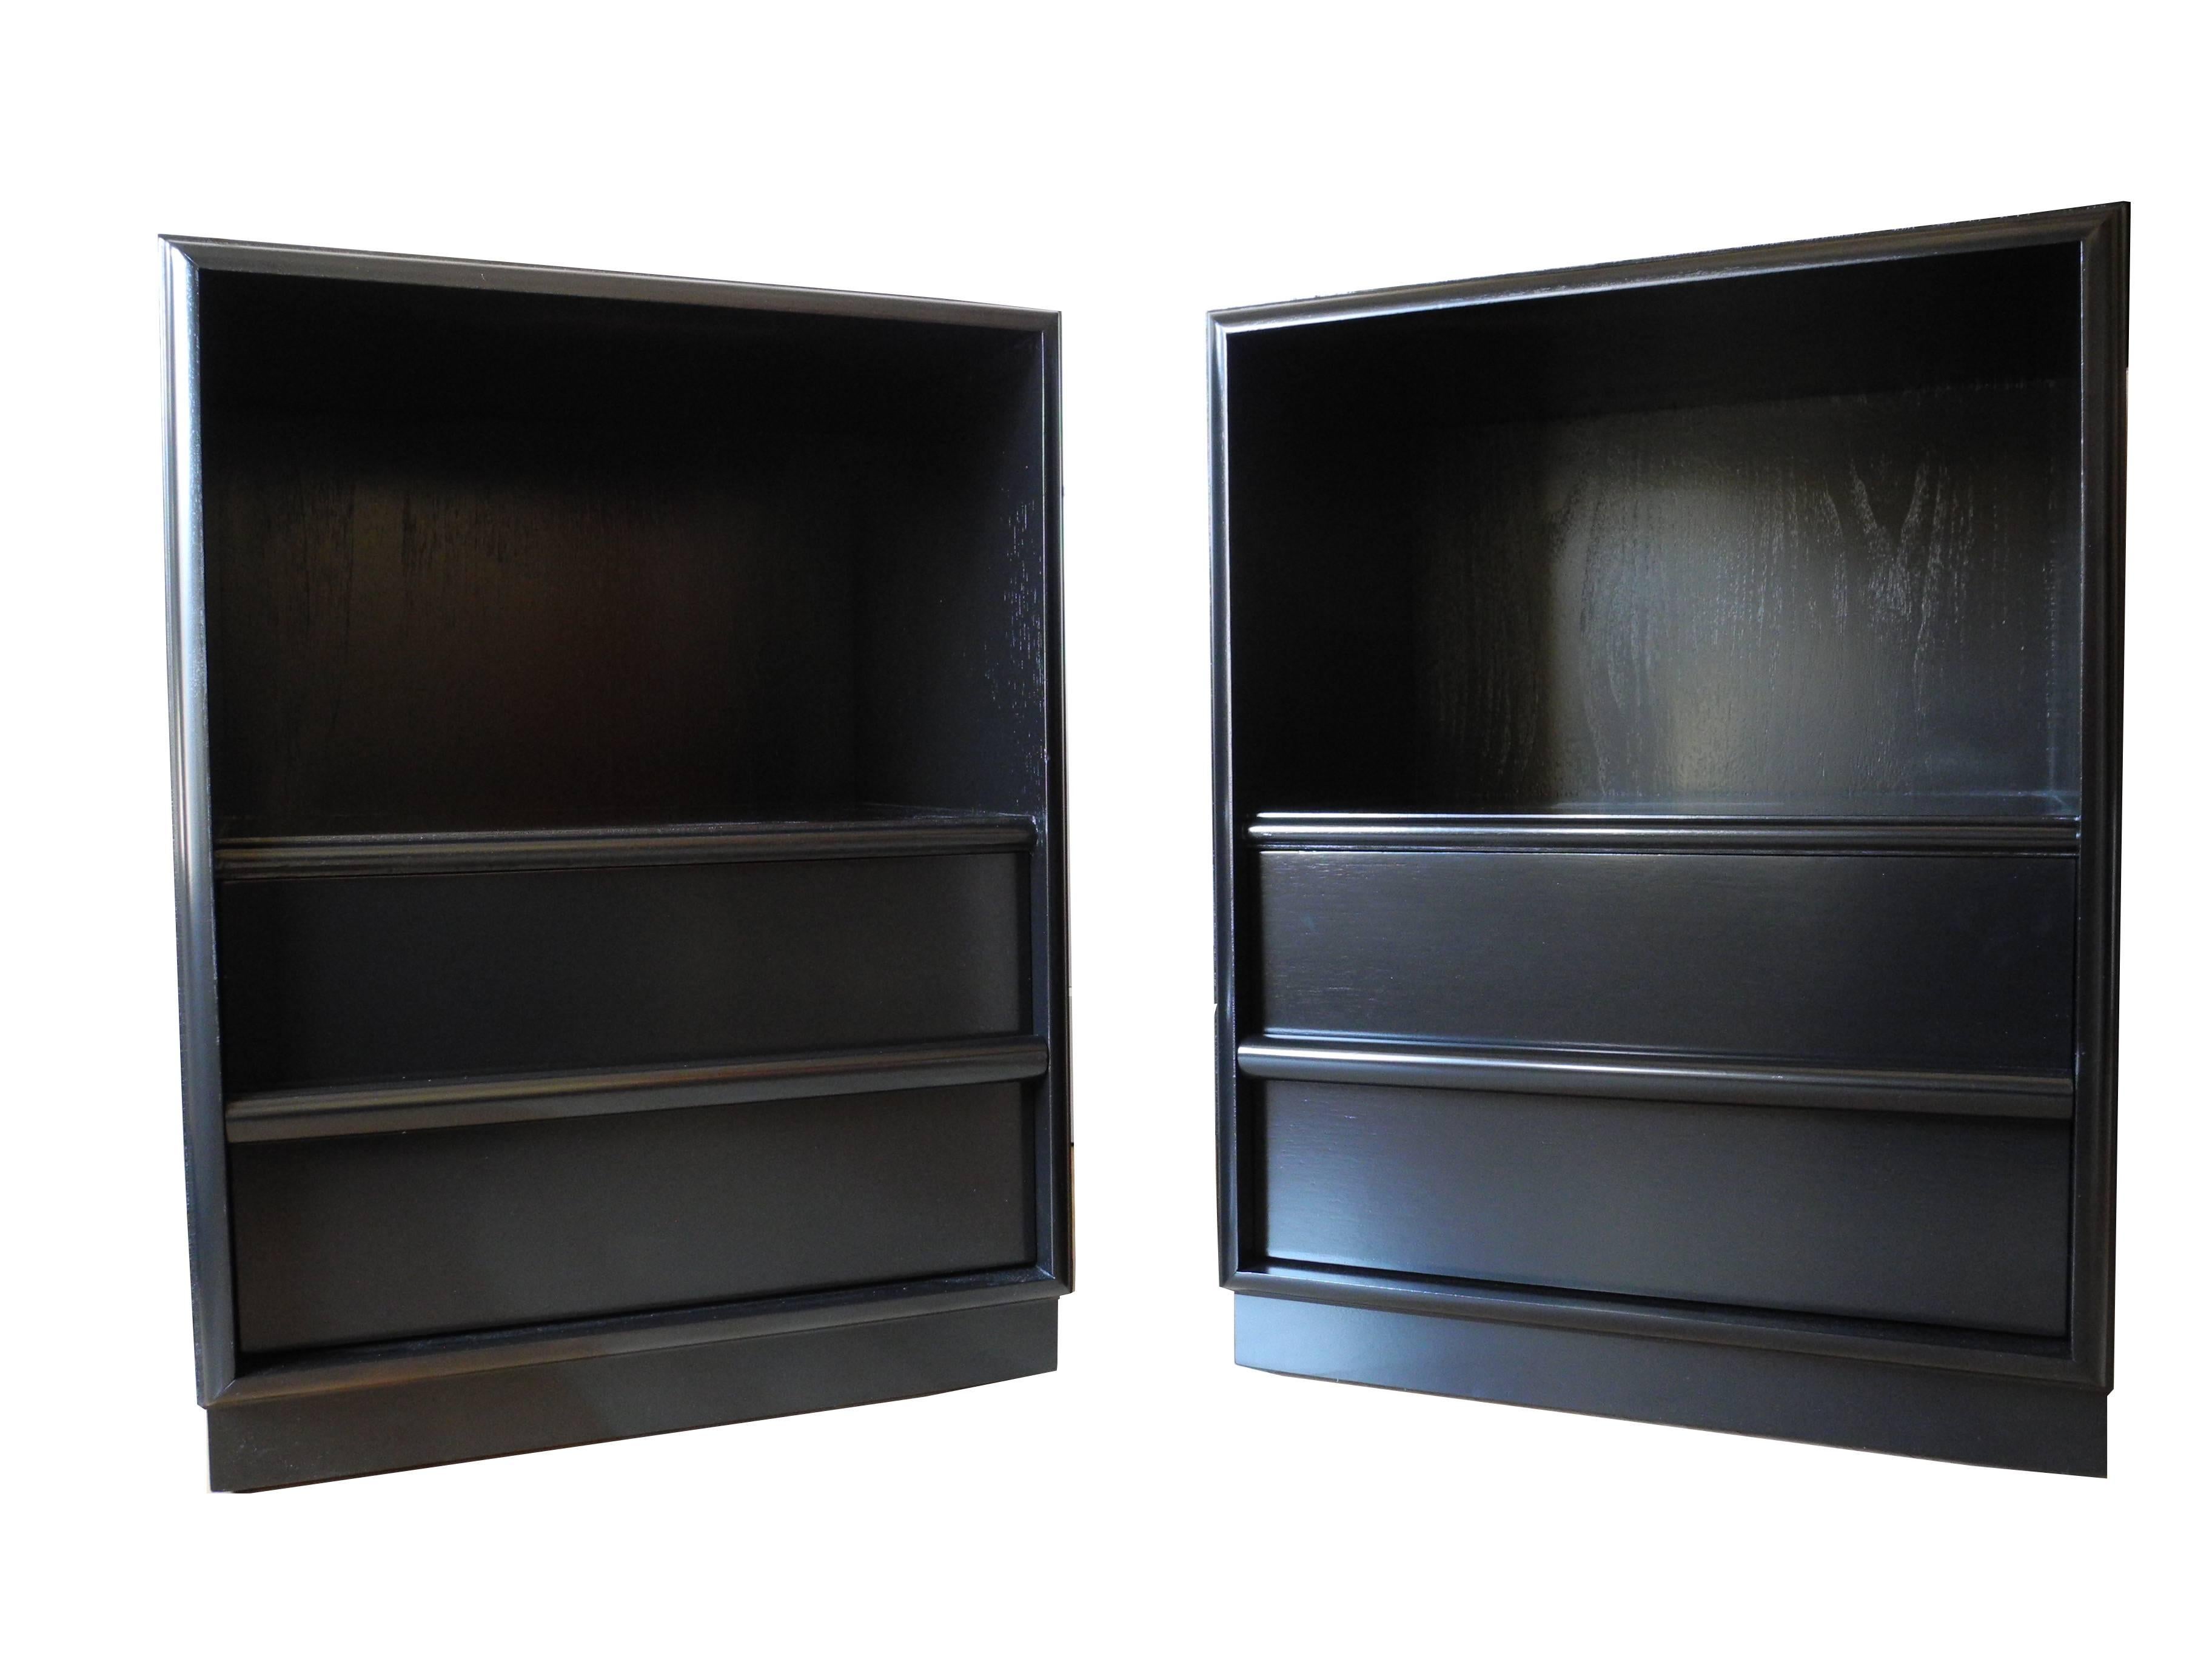 These nightstands are painted black lacquer. The are each equipped with a deep drawer at the base and a cubby on top. Ready to go!